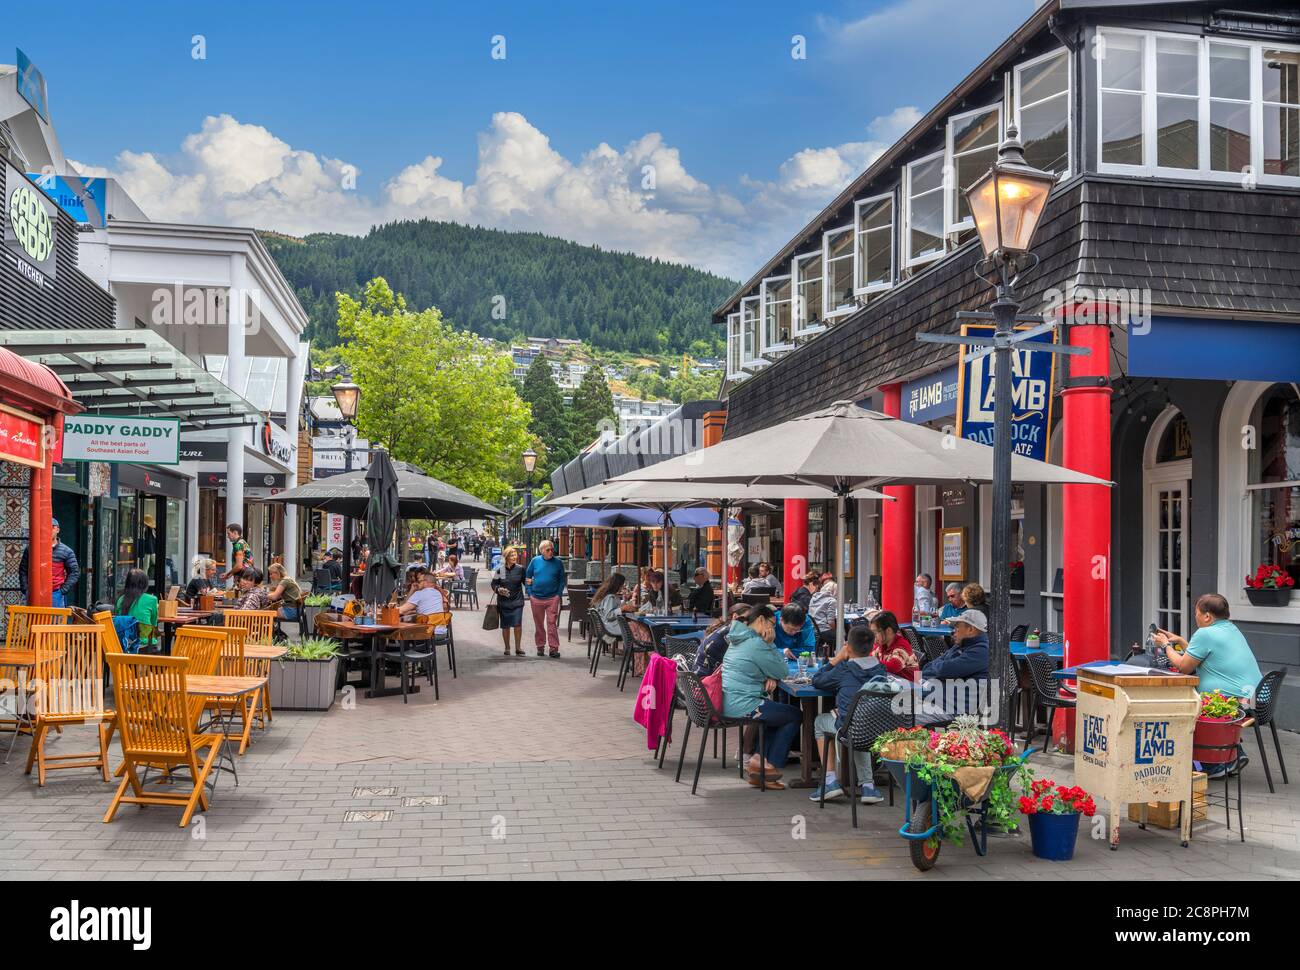 Cafes, bars and shops on Mall Street, Queenstown, New Zealand Stock Photo